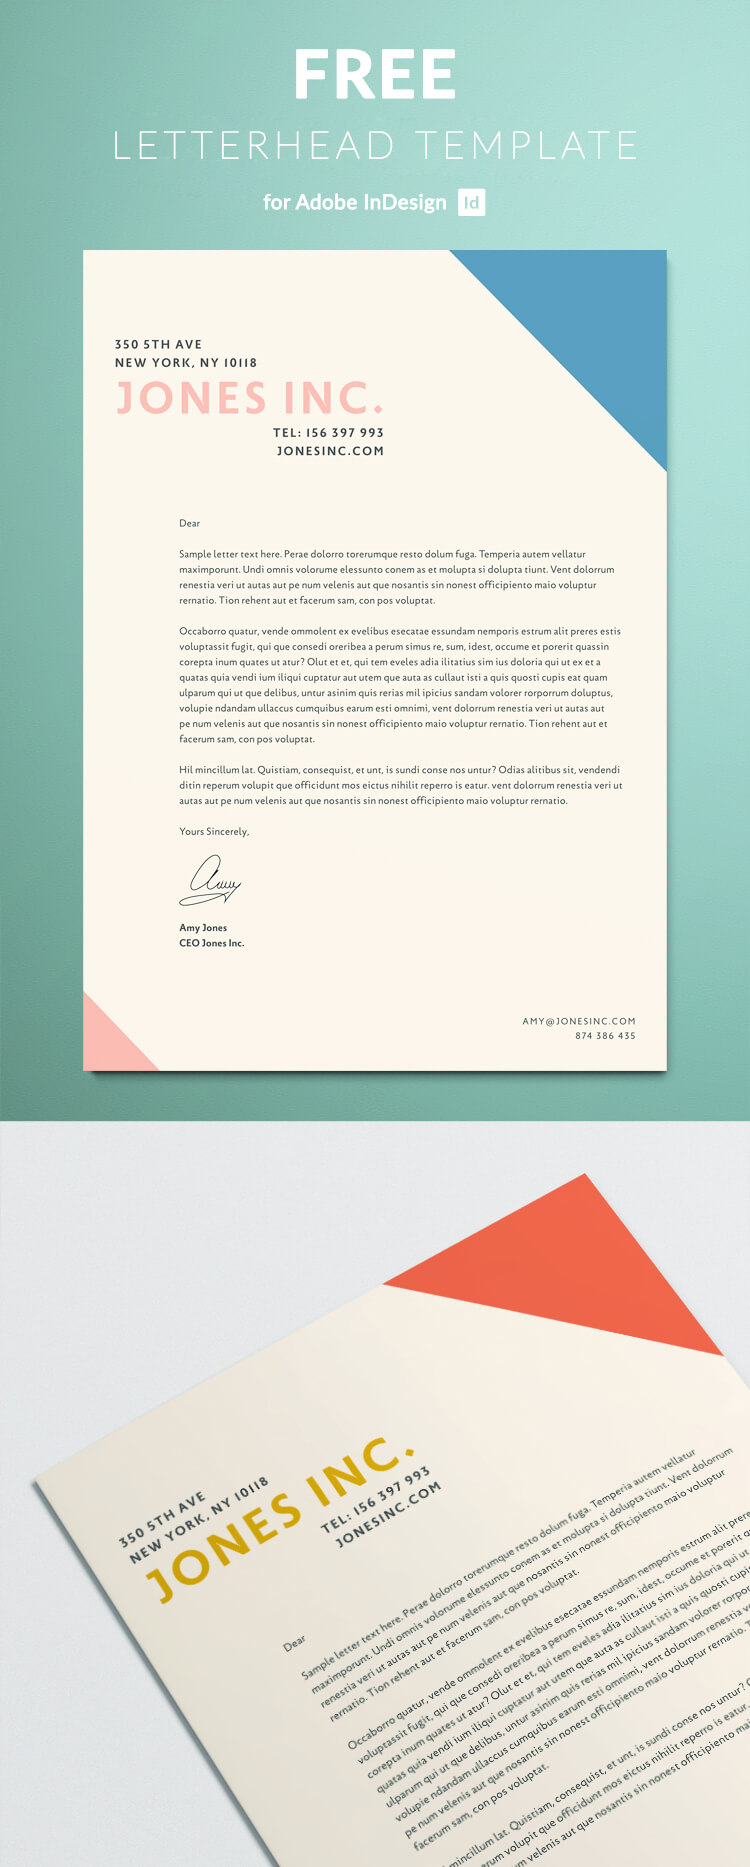 Simple modern letterhead design for a creative business. Download as a free letterhead template for Adobe InDesign.